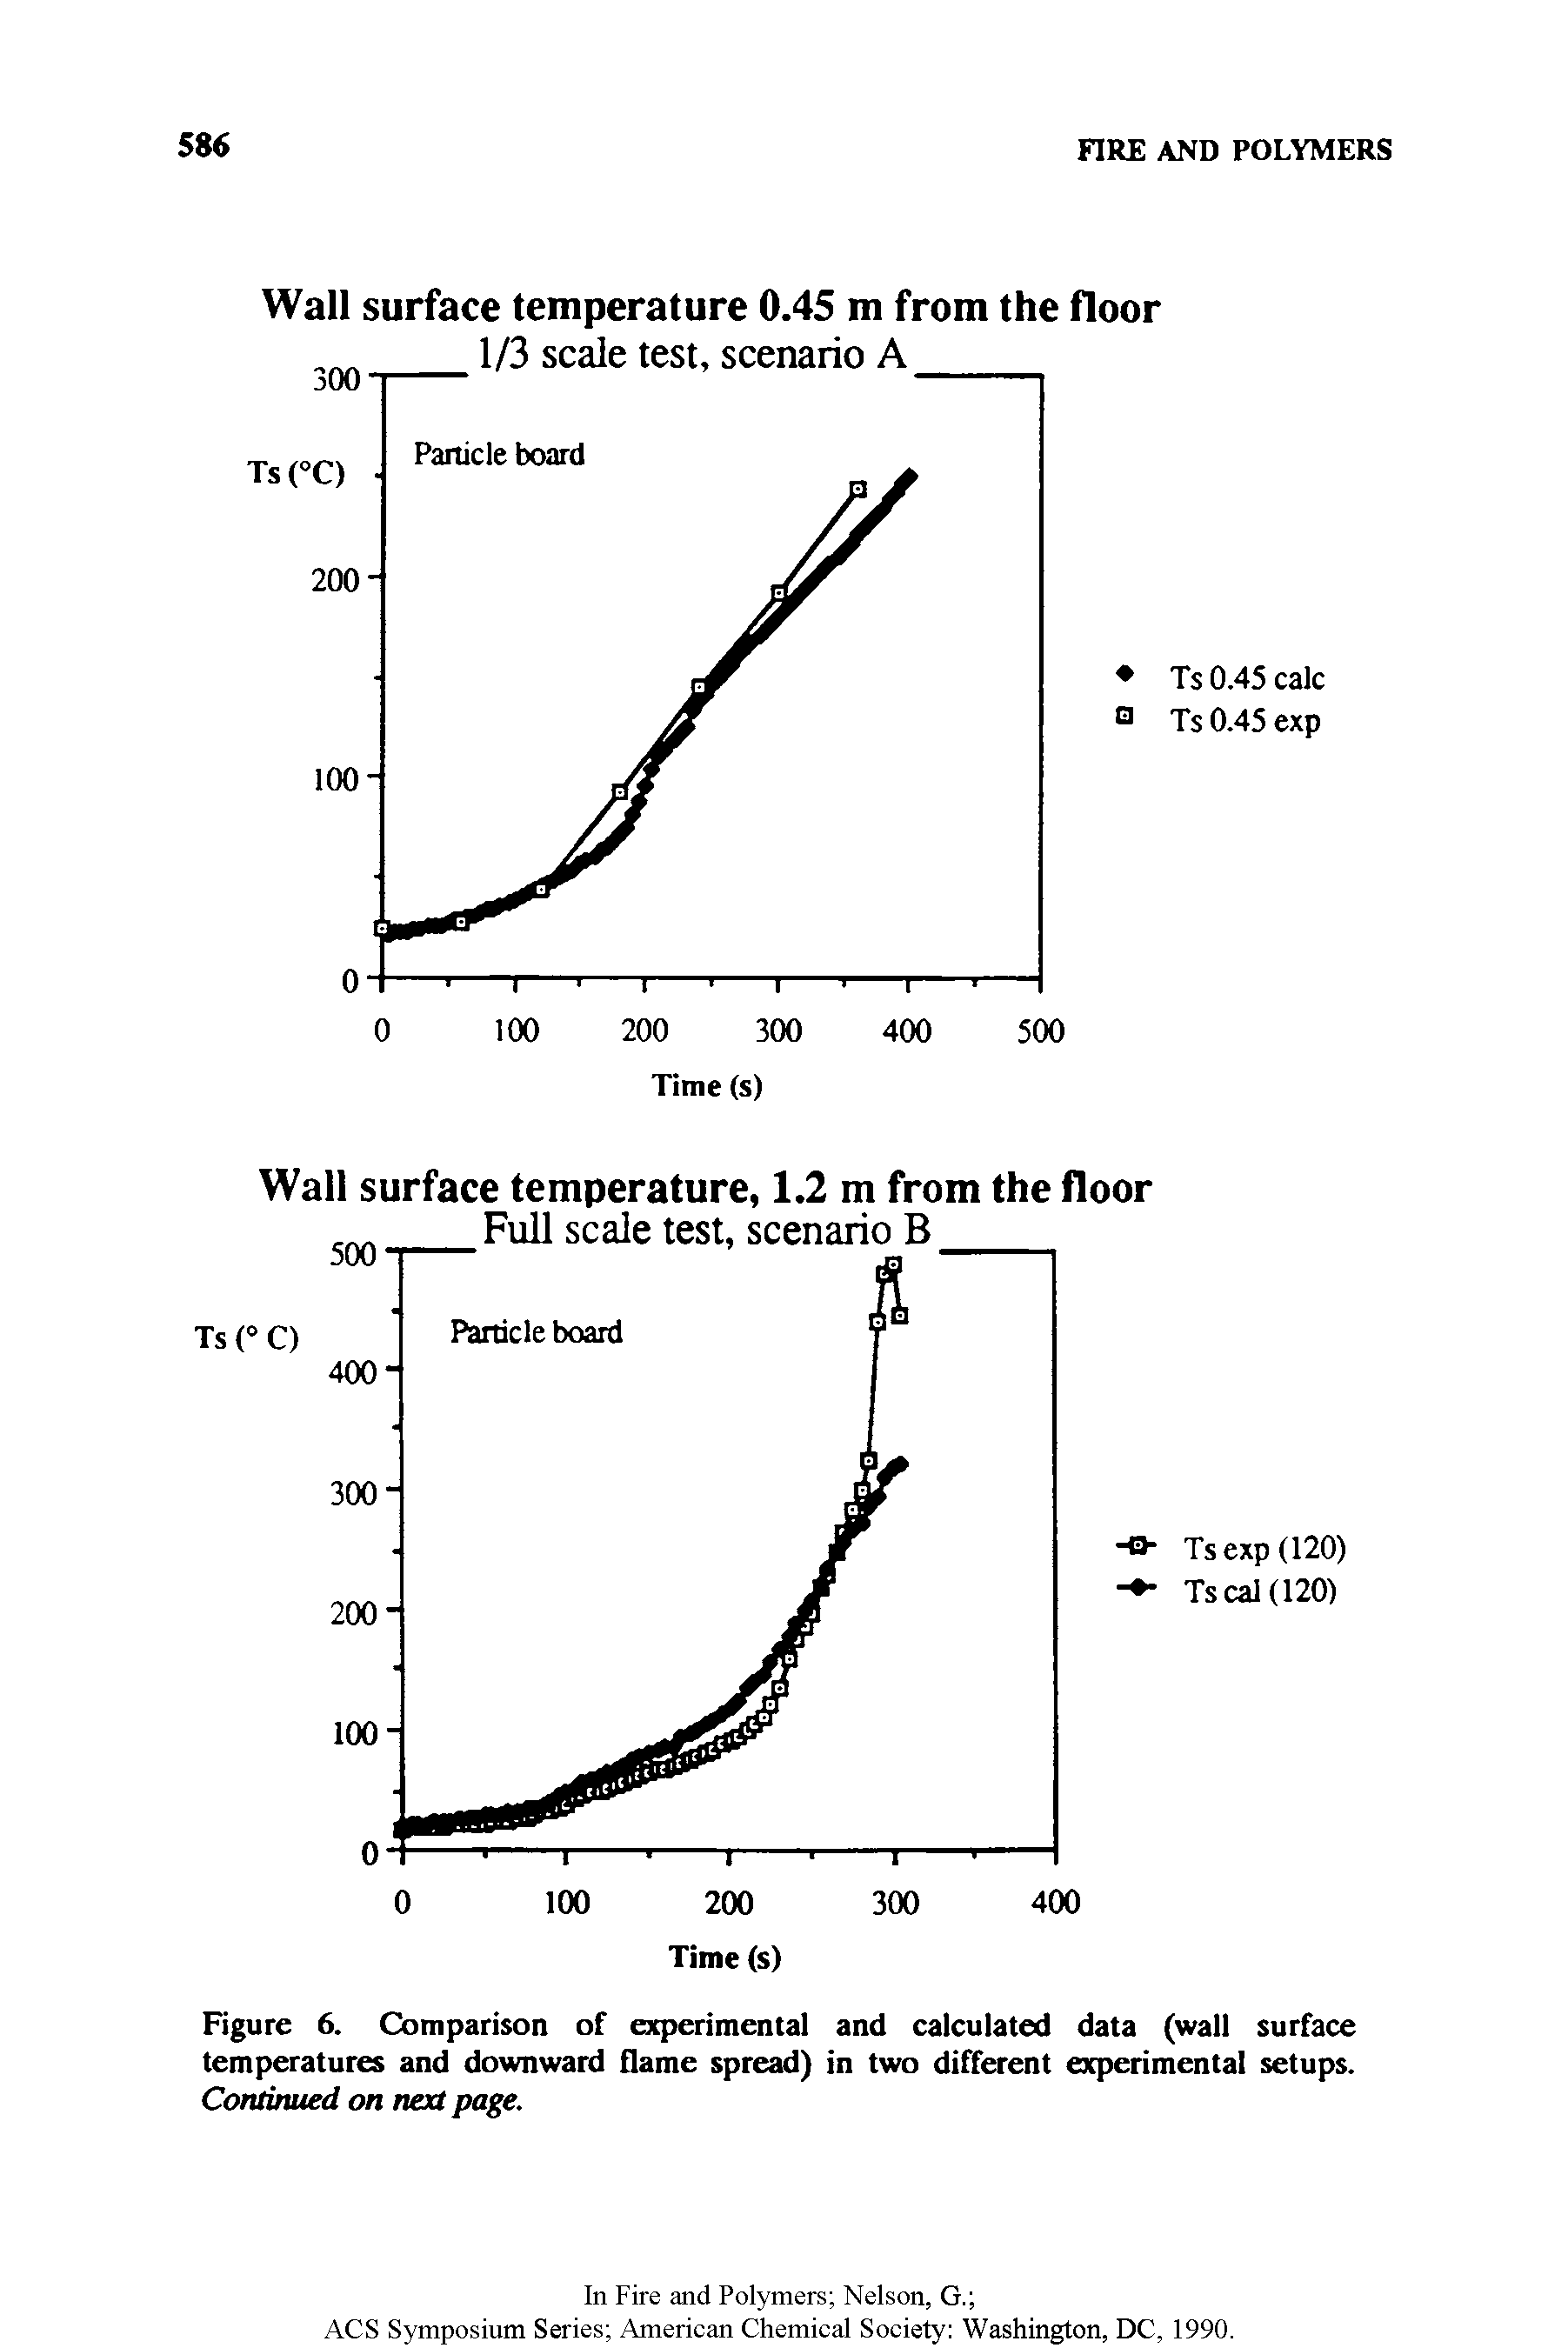 Figure 6. Comparison of experimental and calculated data (wall surface temperatures and downward flame spread) in two different experimental setups. Continued on next page.